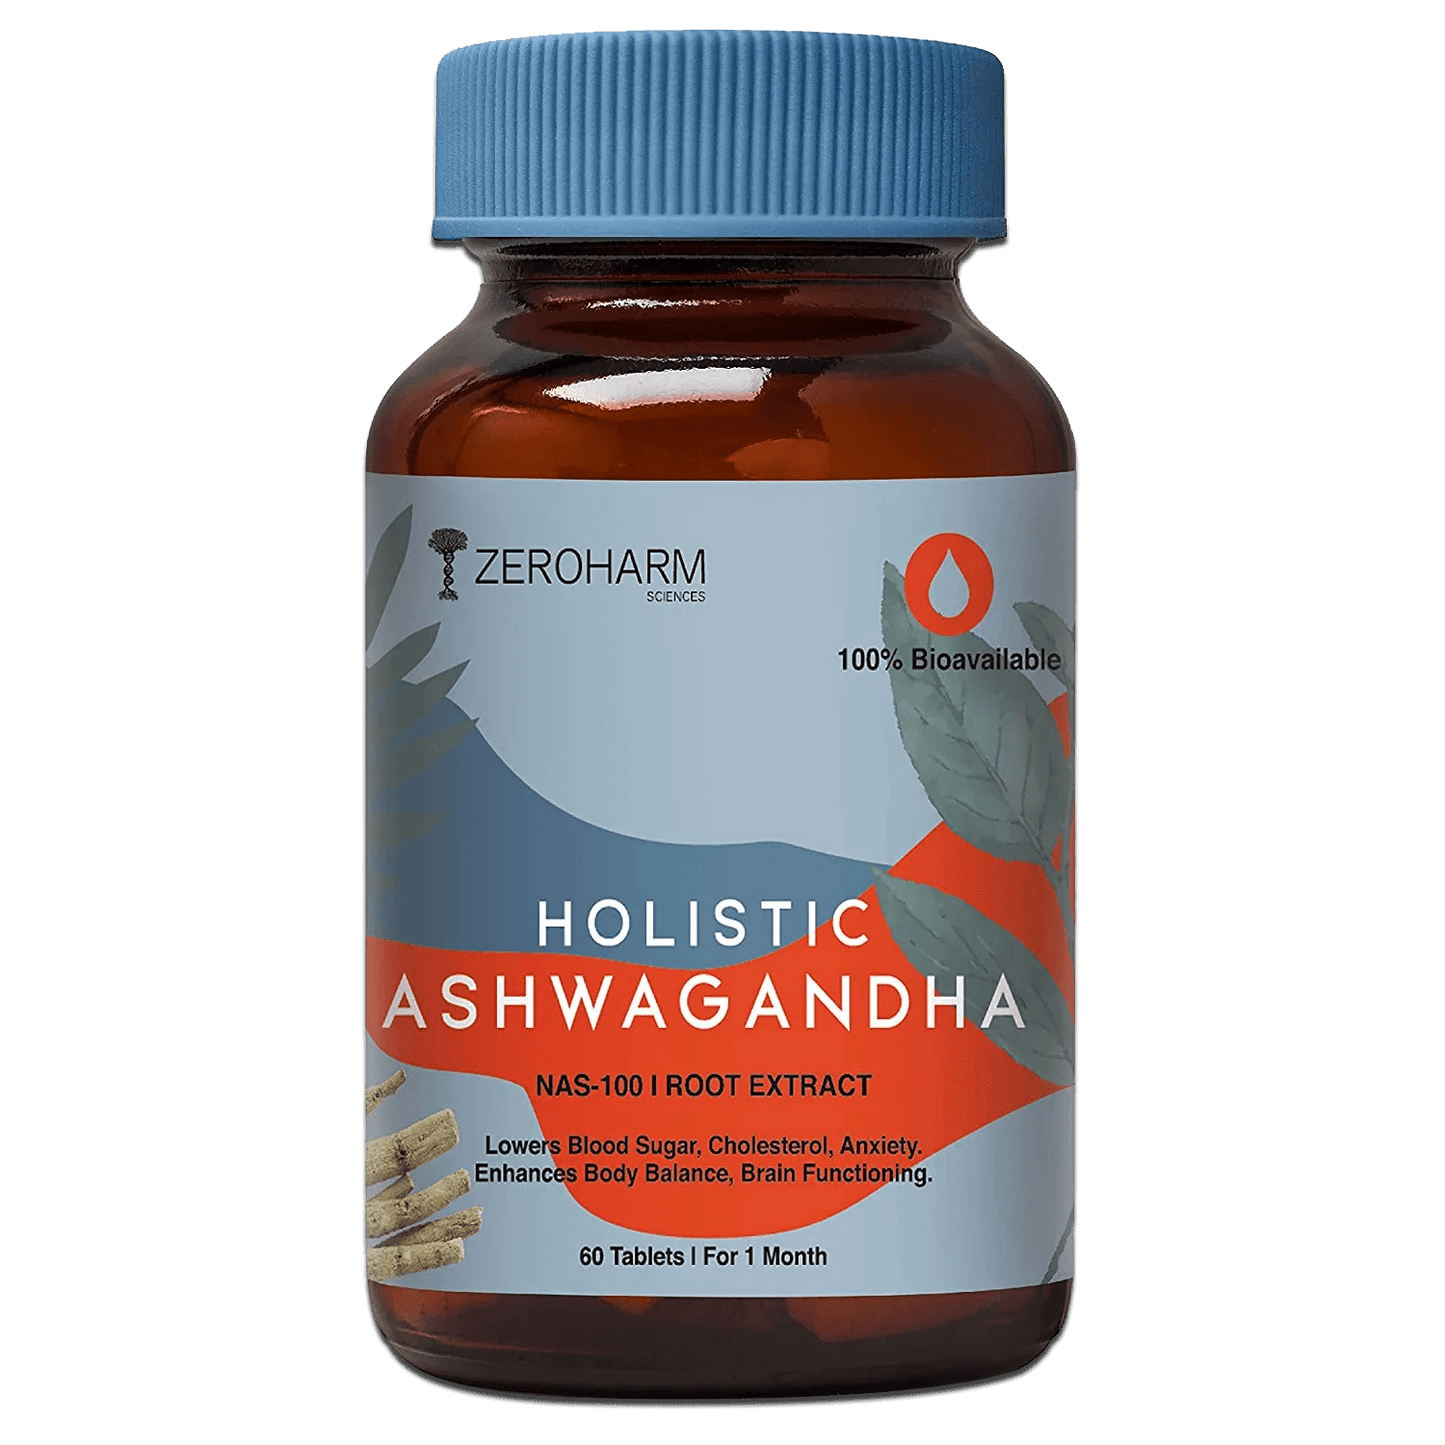 Zeroharm Capsules Holistic Ashwagandha - Stress & Anxiety Relief Tablets (60 tabs)